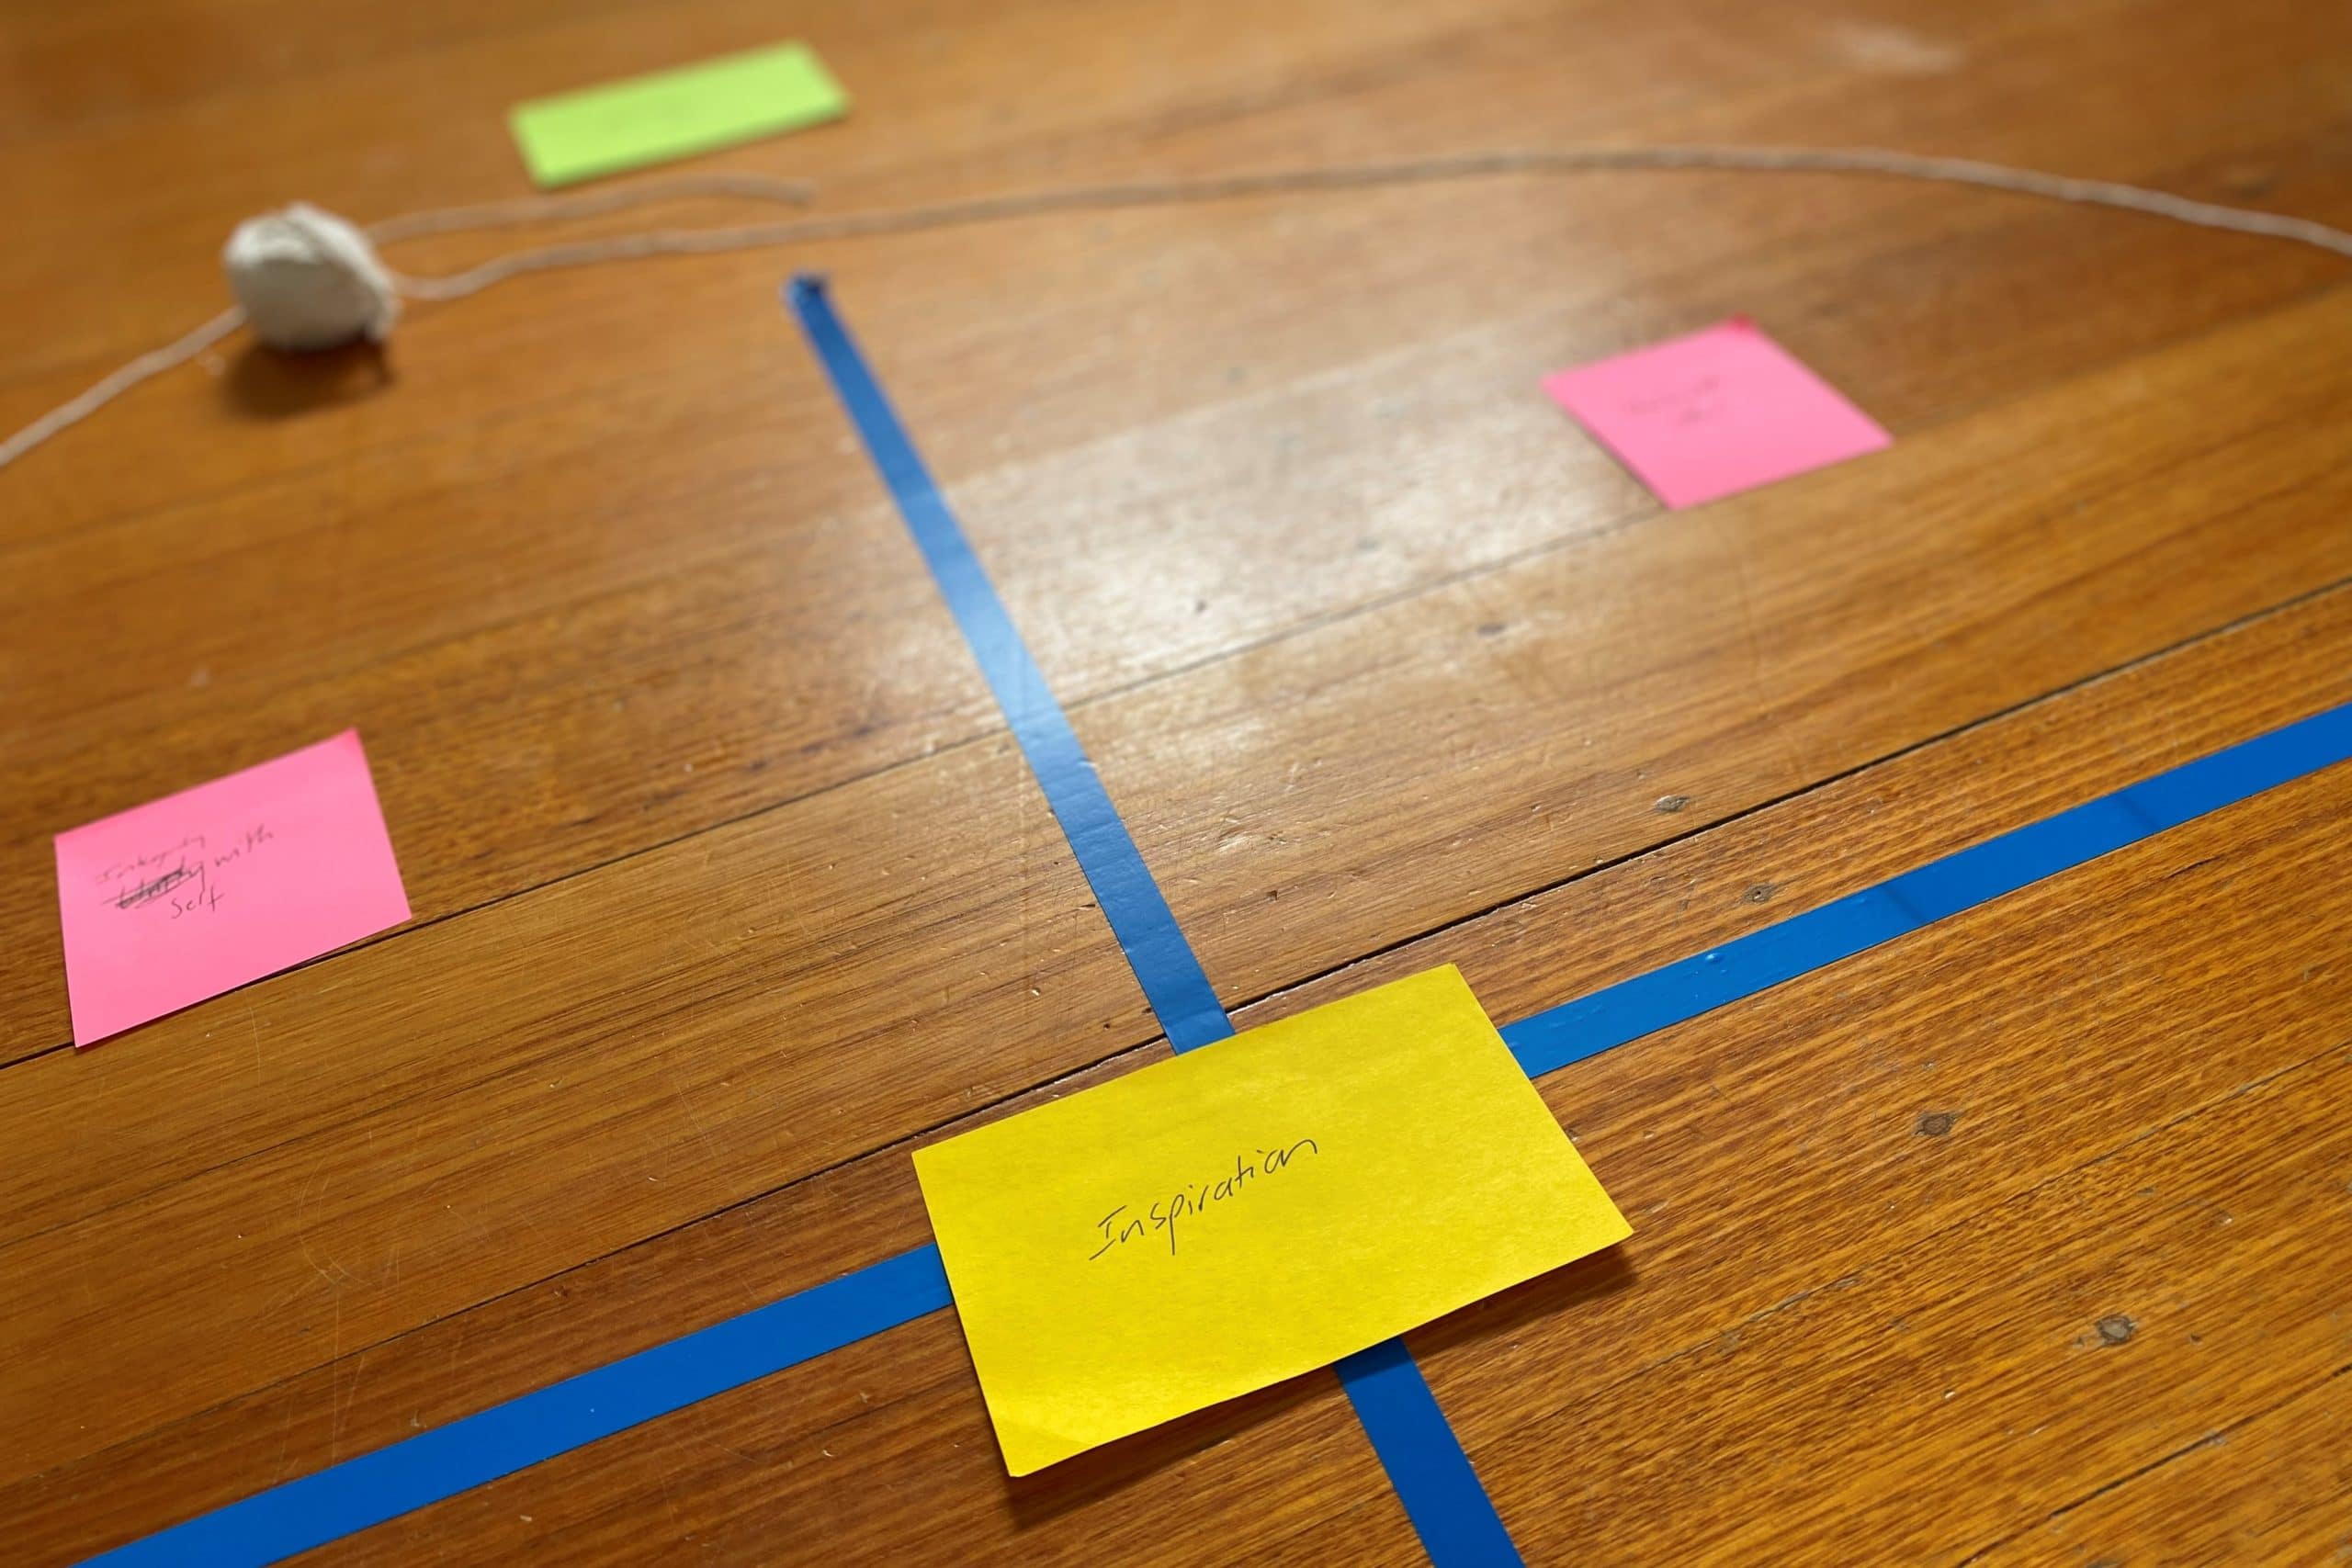 A diagram constructed with electrical tape, string and post-it notes on a wooden floor. The diagram is circular with four defined quadrants. At the centre is a post-it note with the word Inspiration.